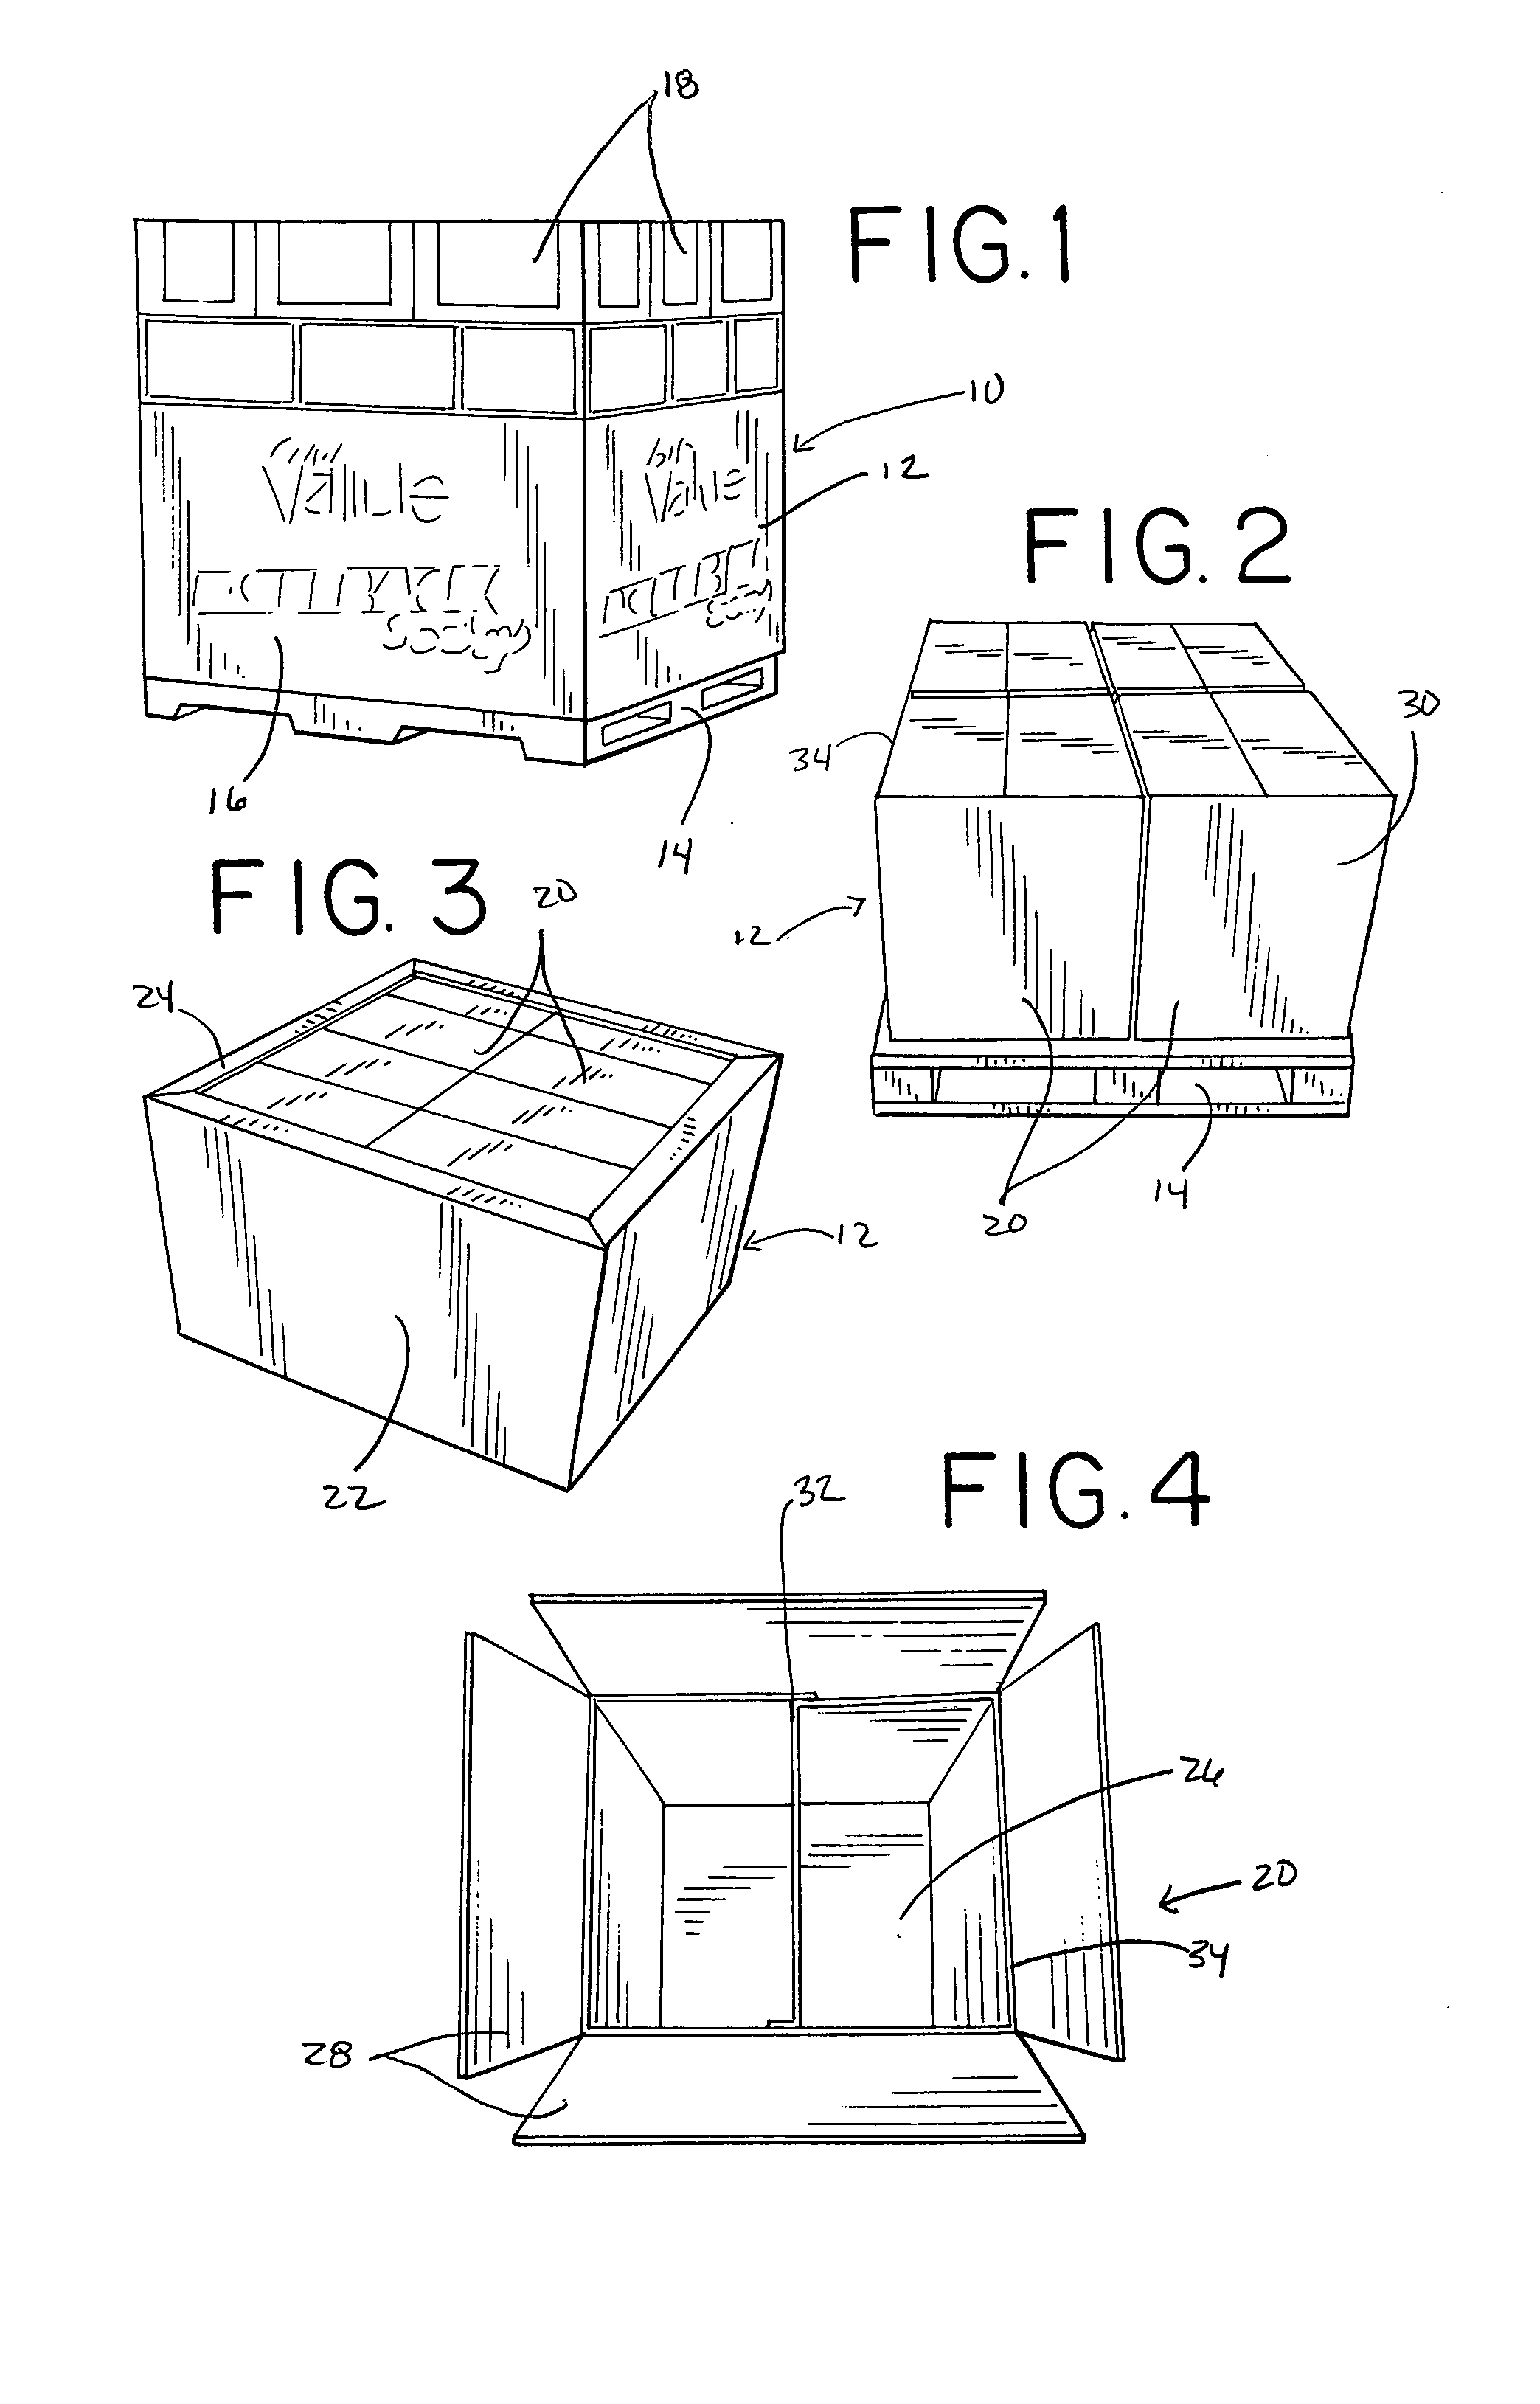 Shipping and display system